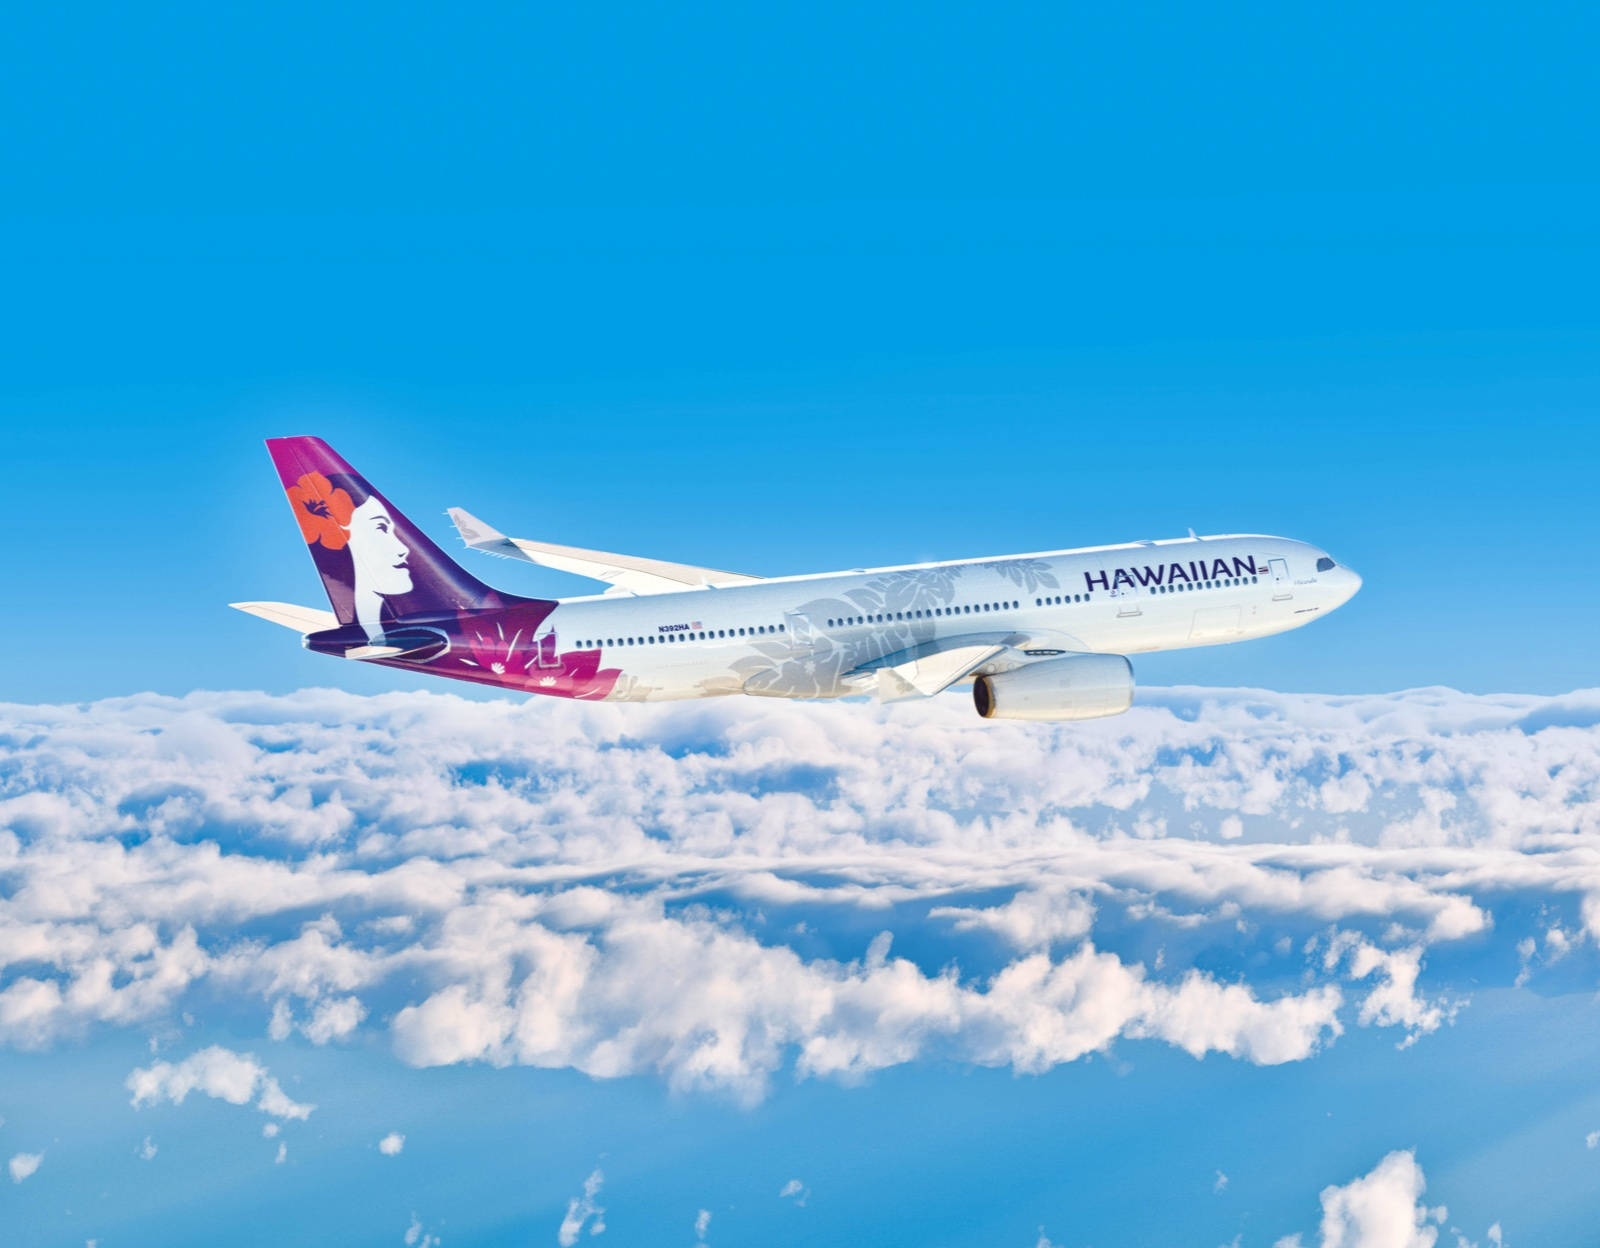 Hawaiian Airlines On Sea Of Clouds Background